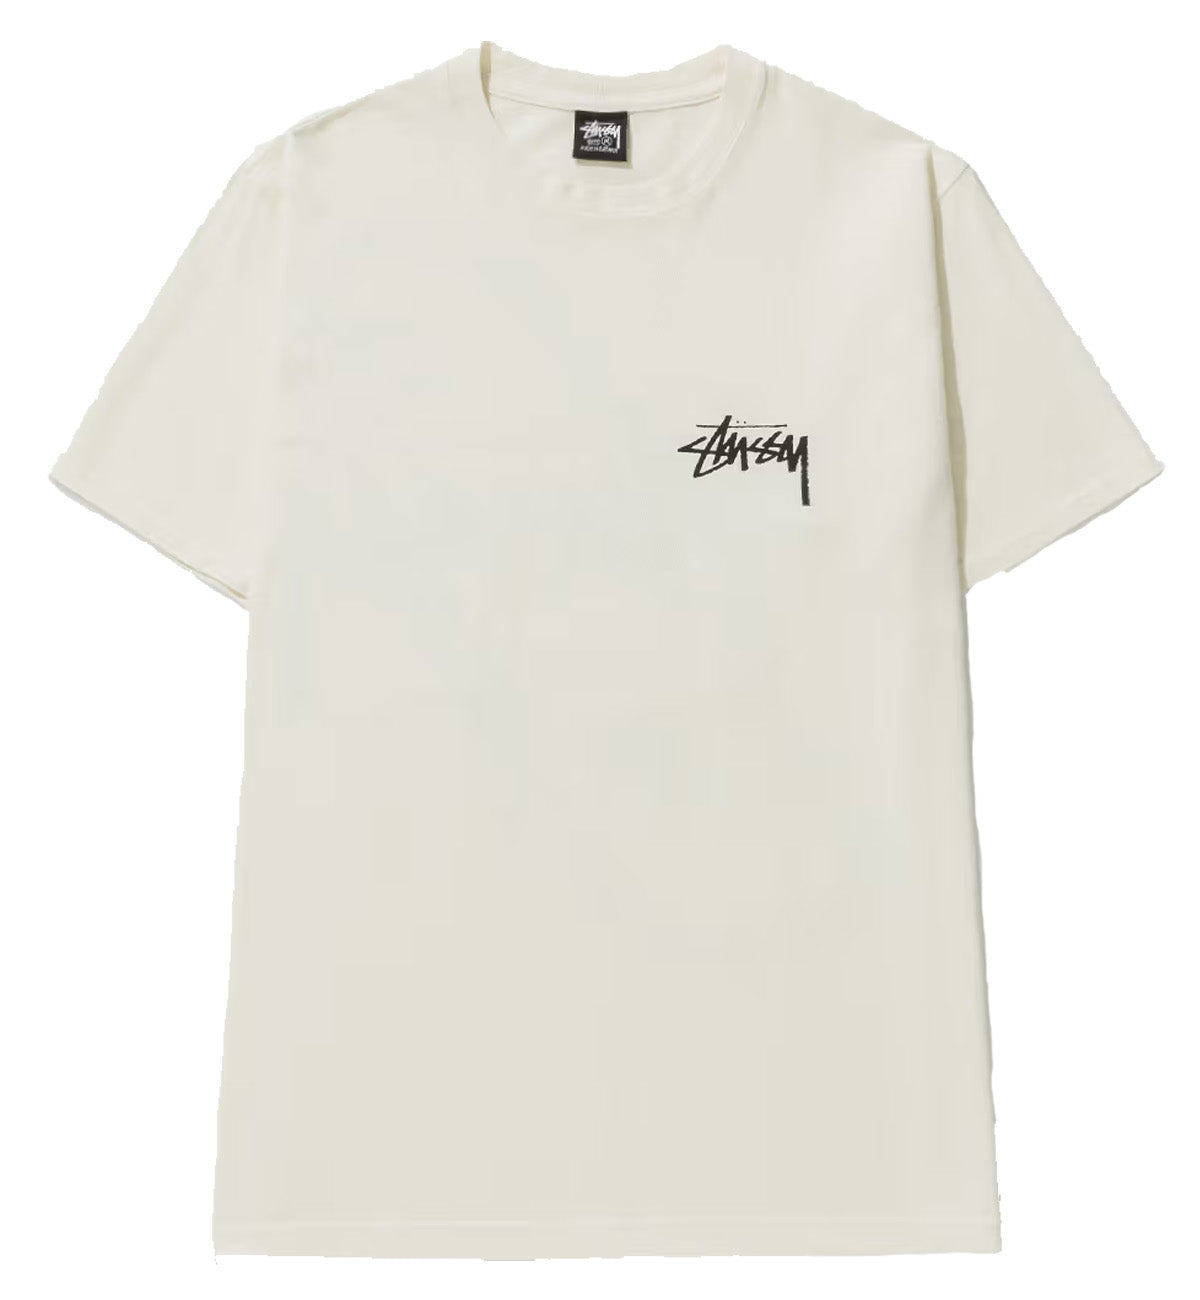 Stüssy Skate Posse Pigment Dyed Tee (White) | Shop authentic streetwear ...